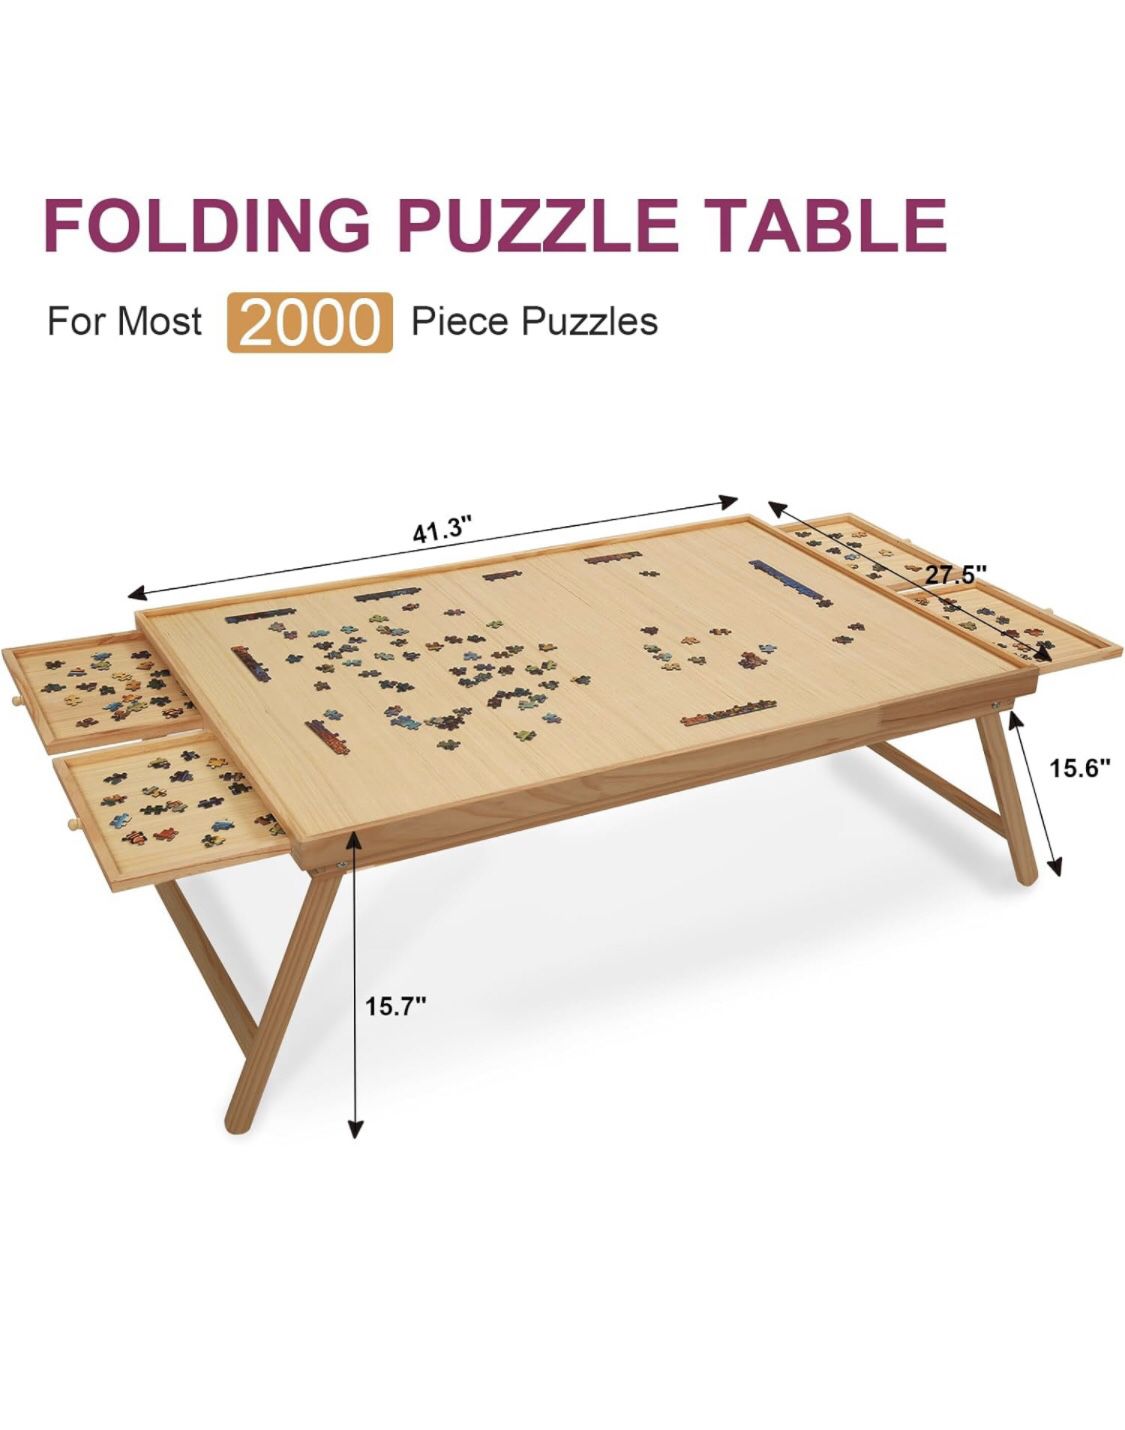 2000 Piece Portable Puzzle Table with Folding Legs, 41.3"X27.5" Wooden Jigsaw Puzzle Board with 4 Drawers & Cover, Family Multifunctional Folding Tabl